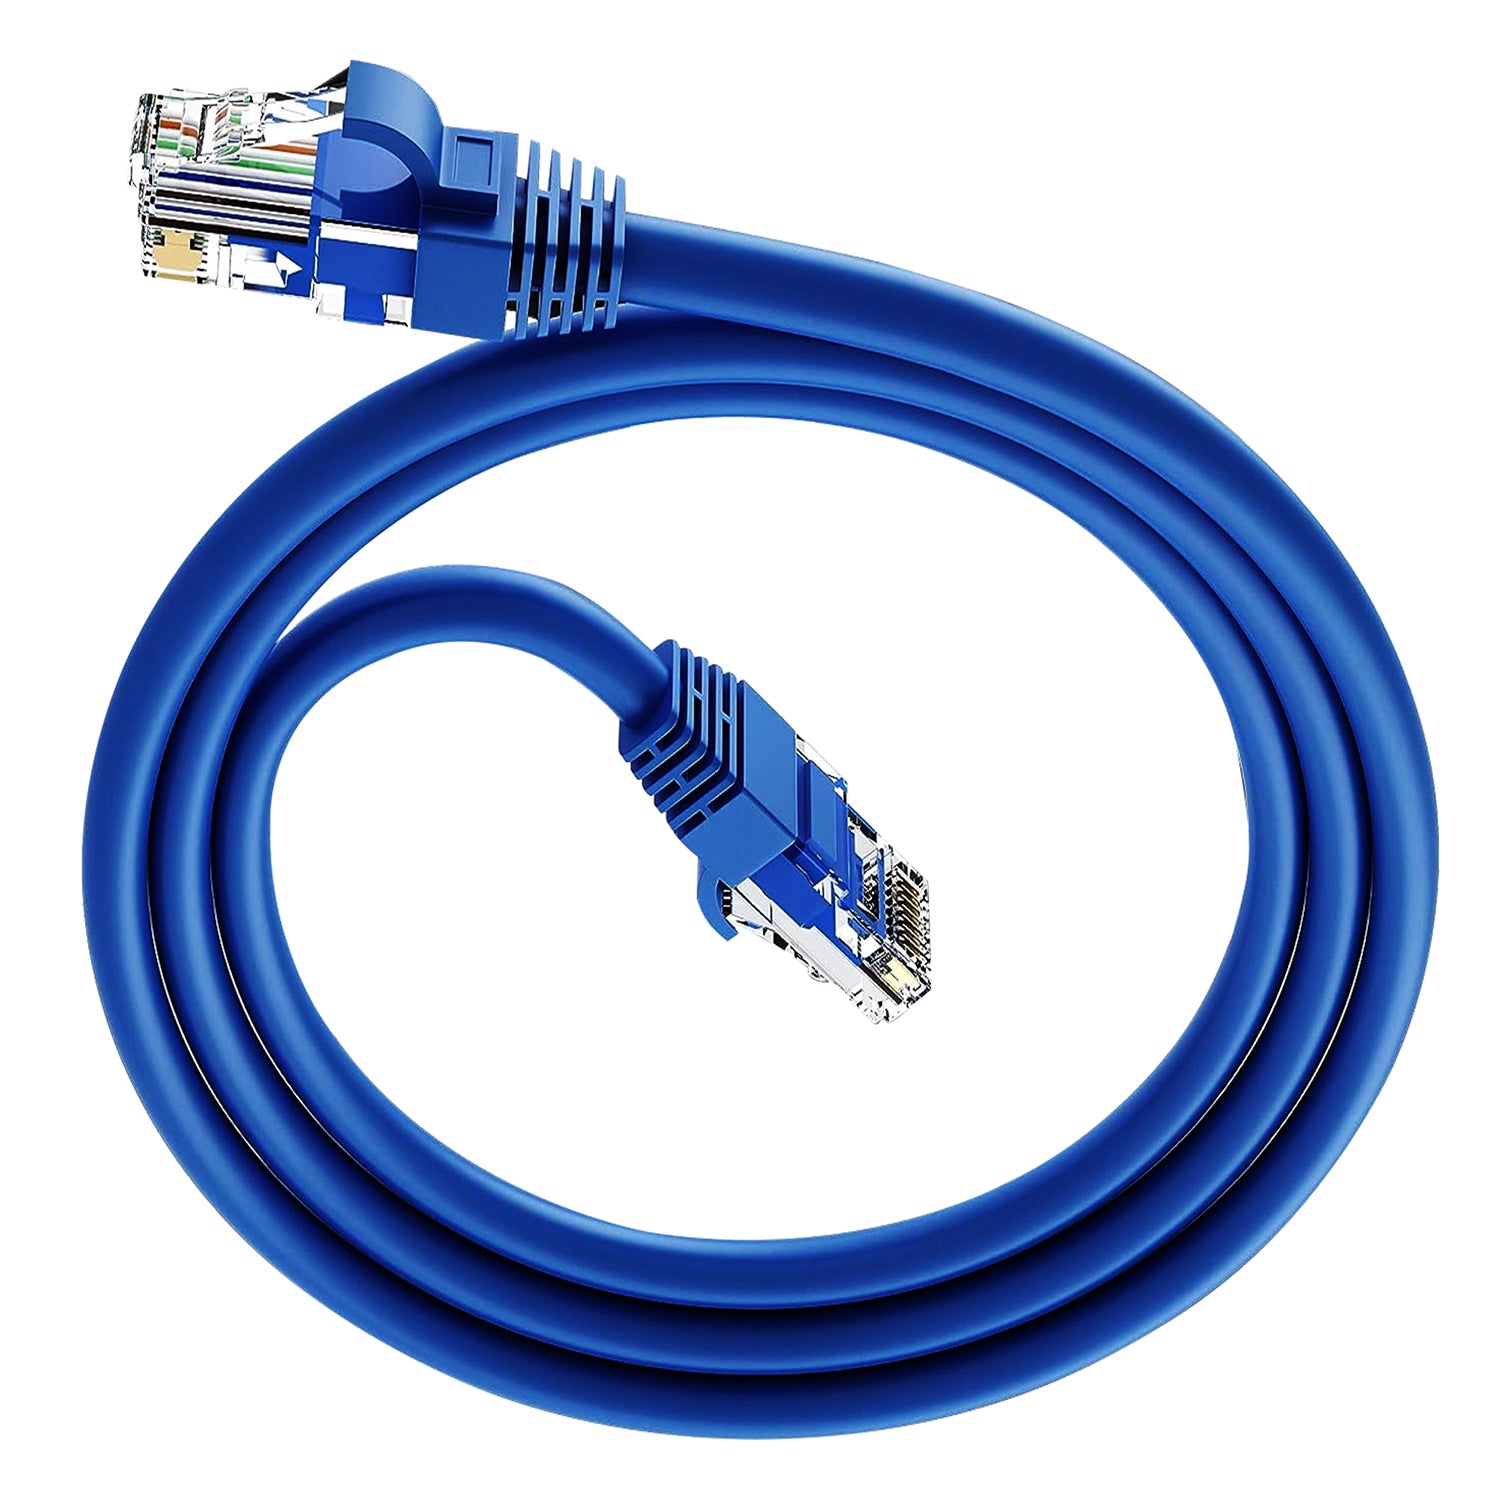 5 Core Cat 6 Ethernet Cable • 3 ft 10Gbps Network Patch Cord • High Speed RJ45 Internet LAN Cable